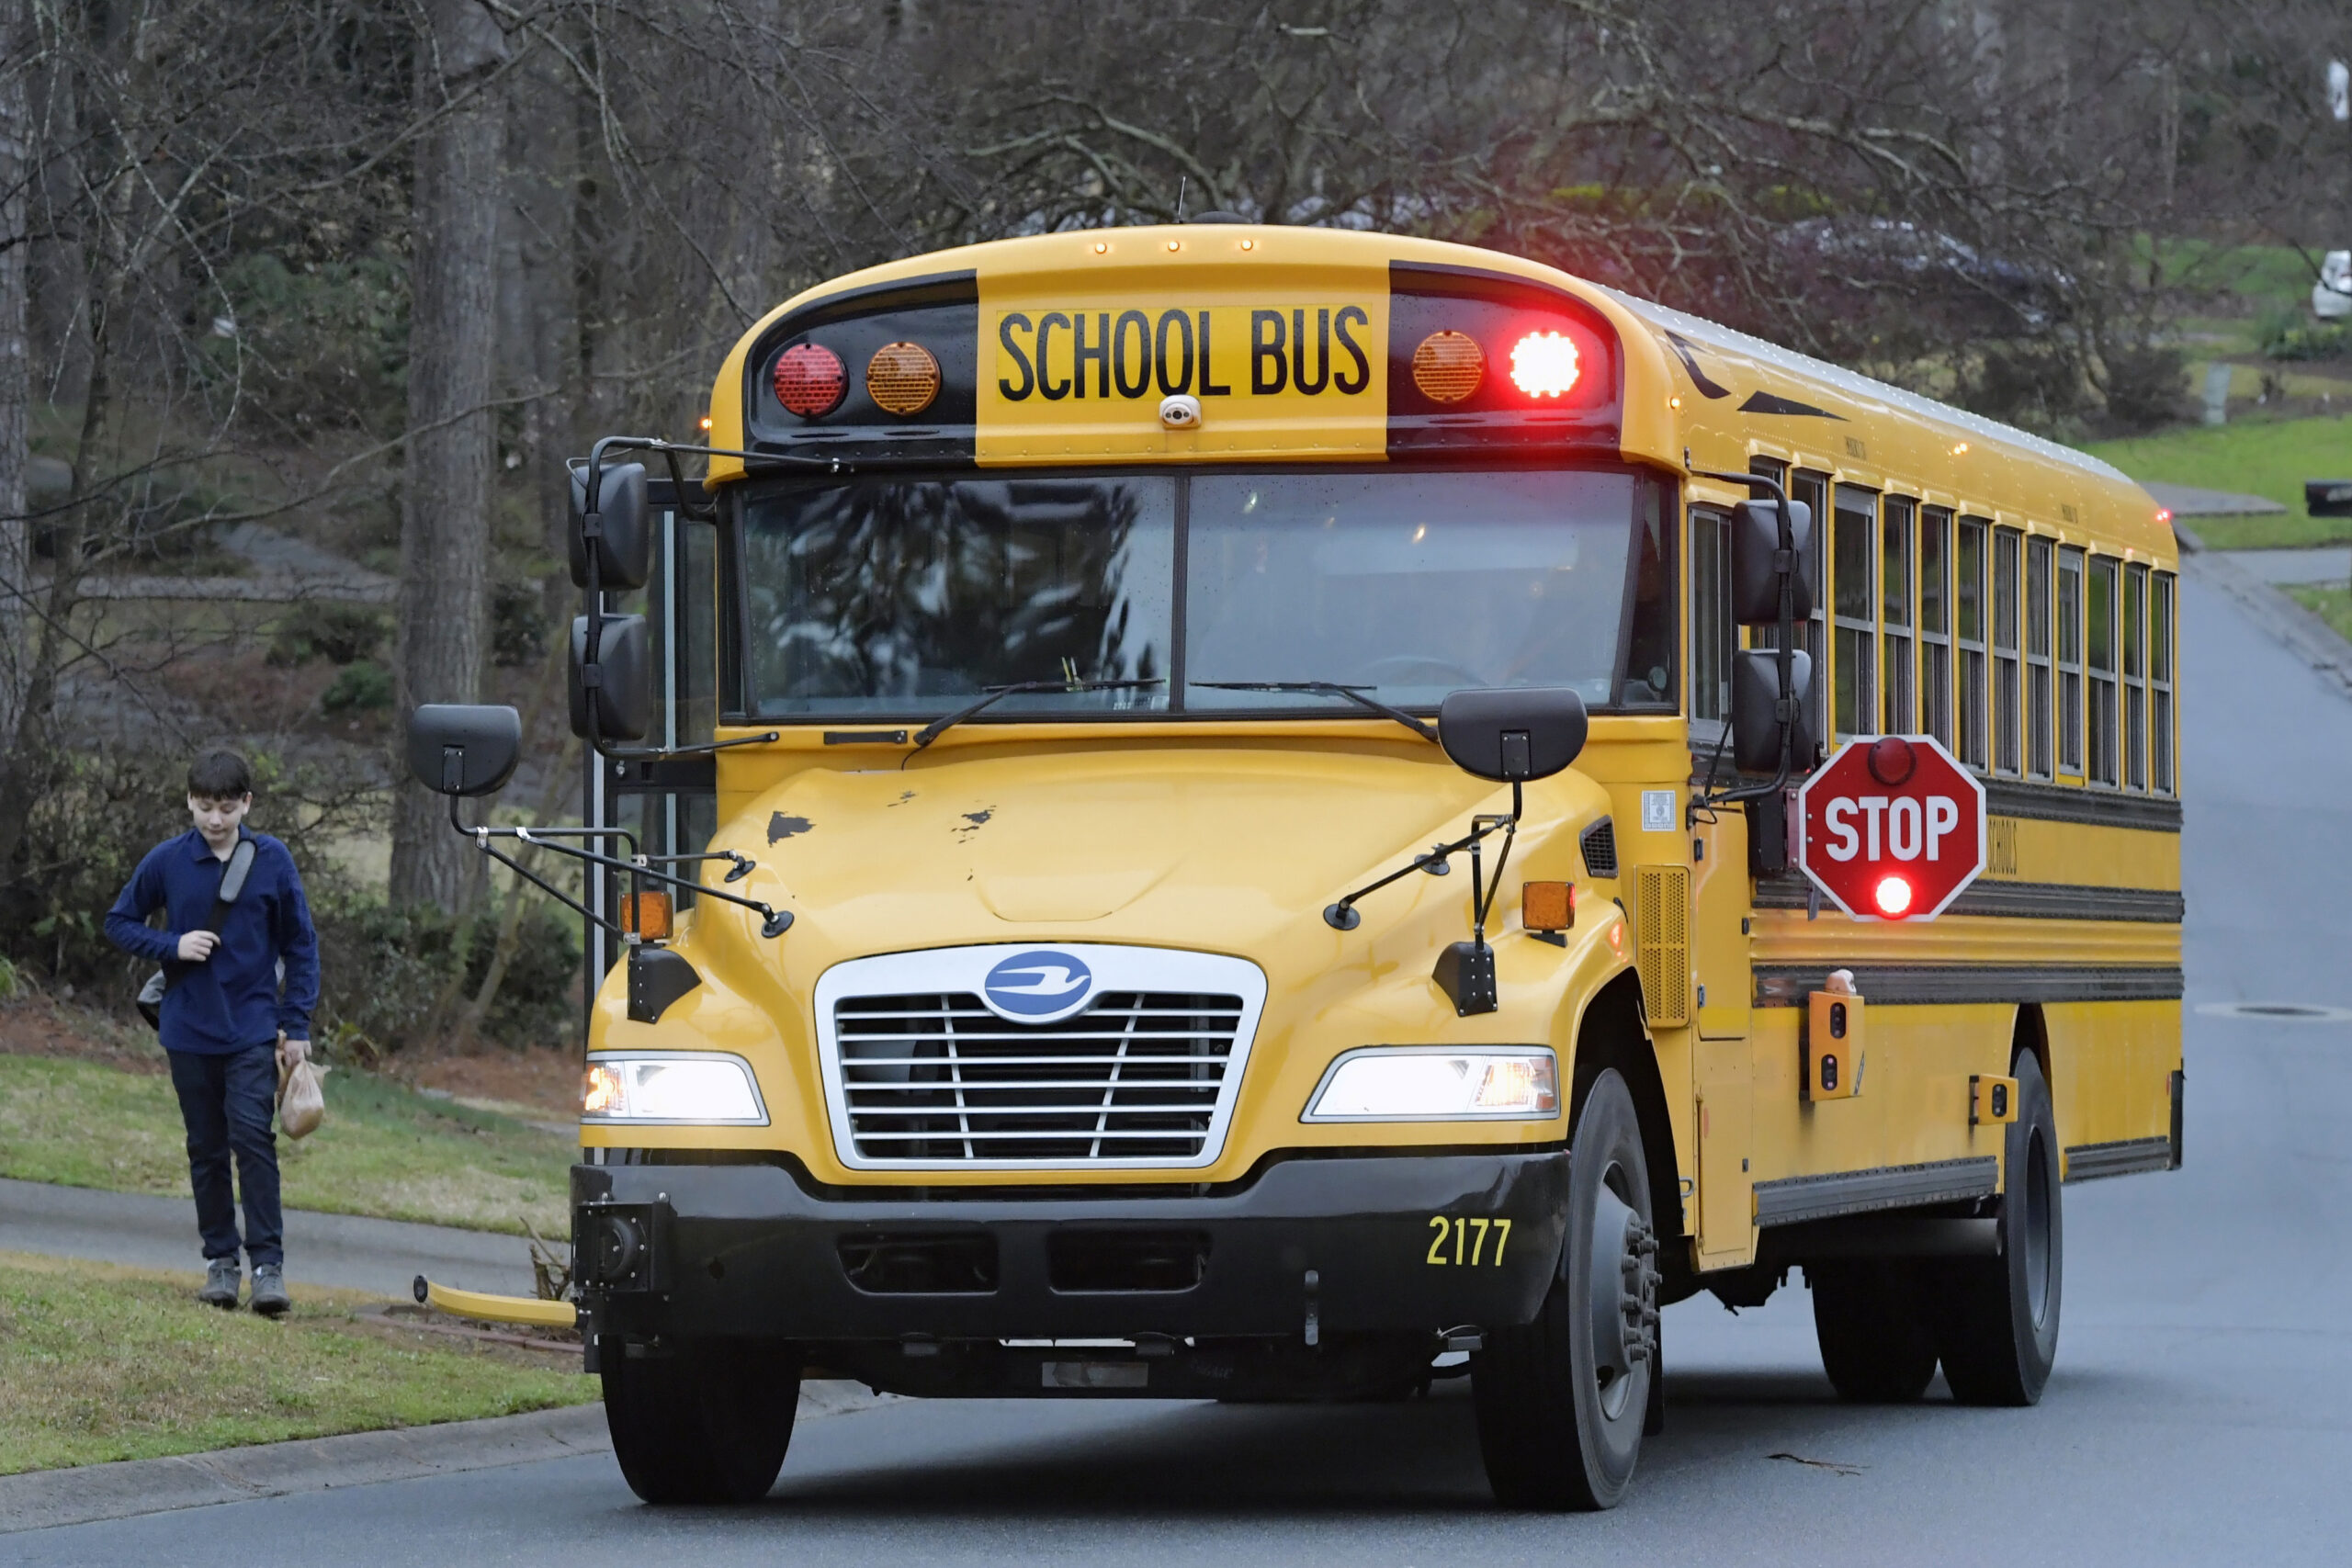 A Cobb County School bus moves on street.